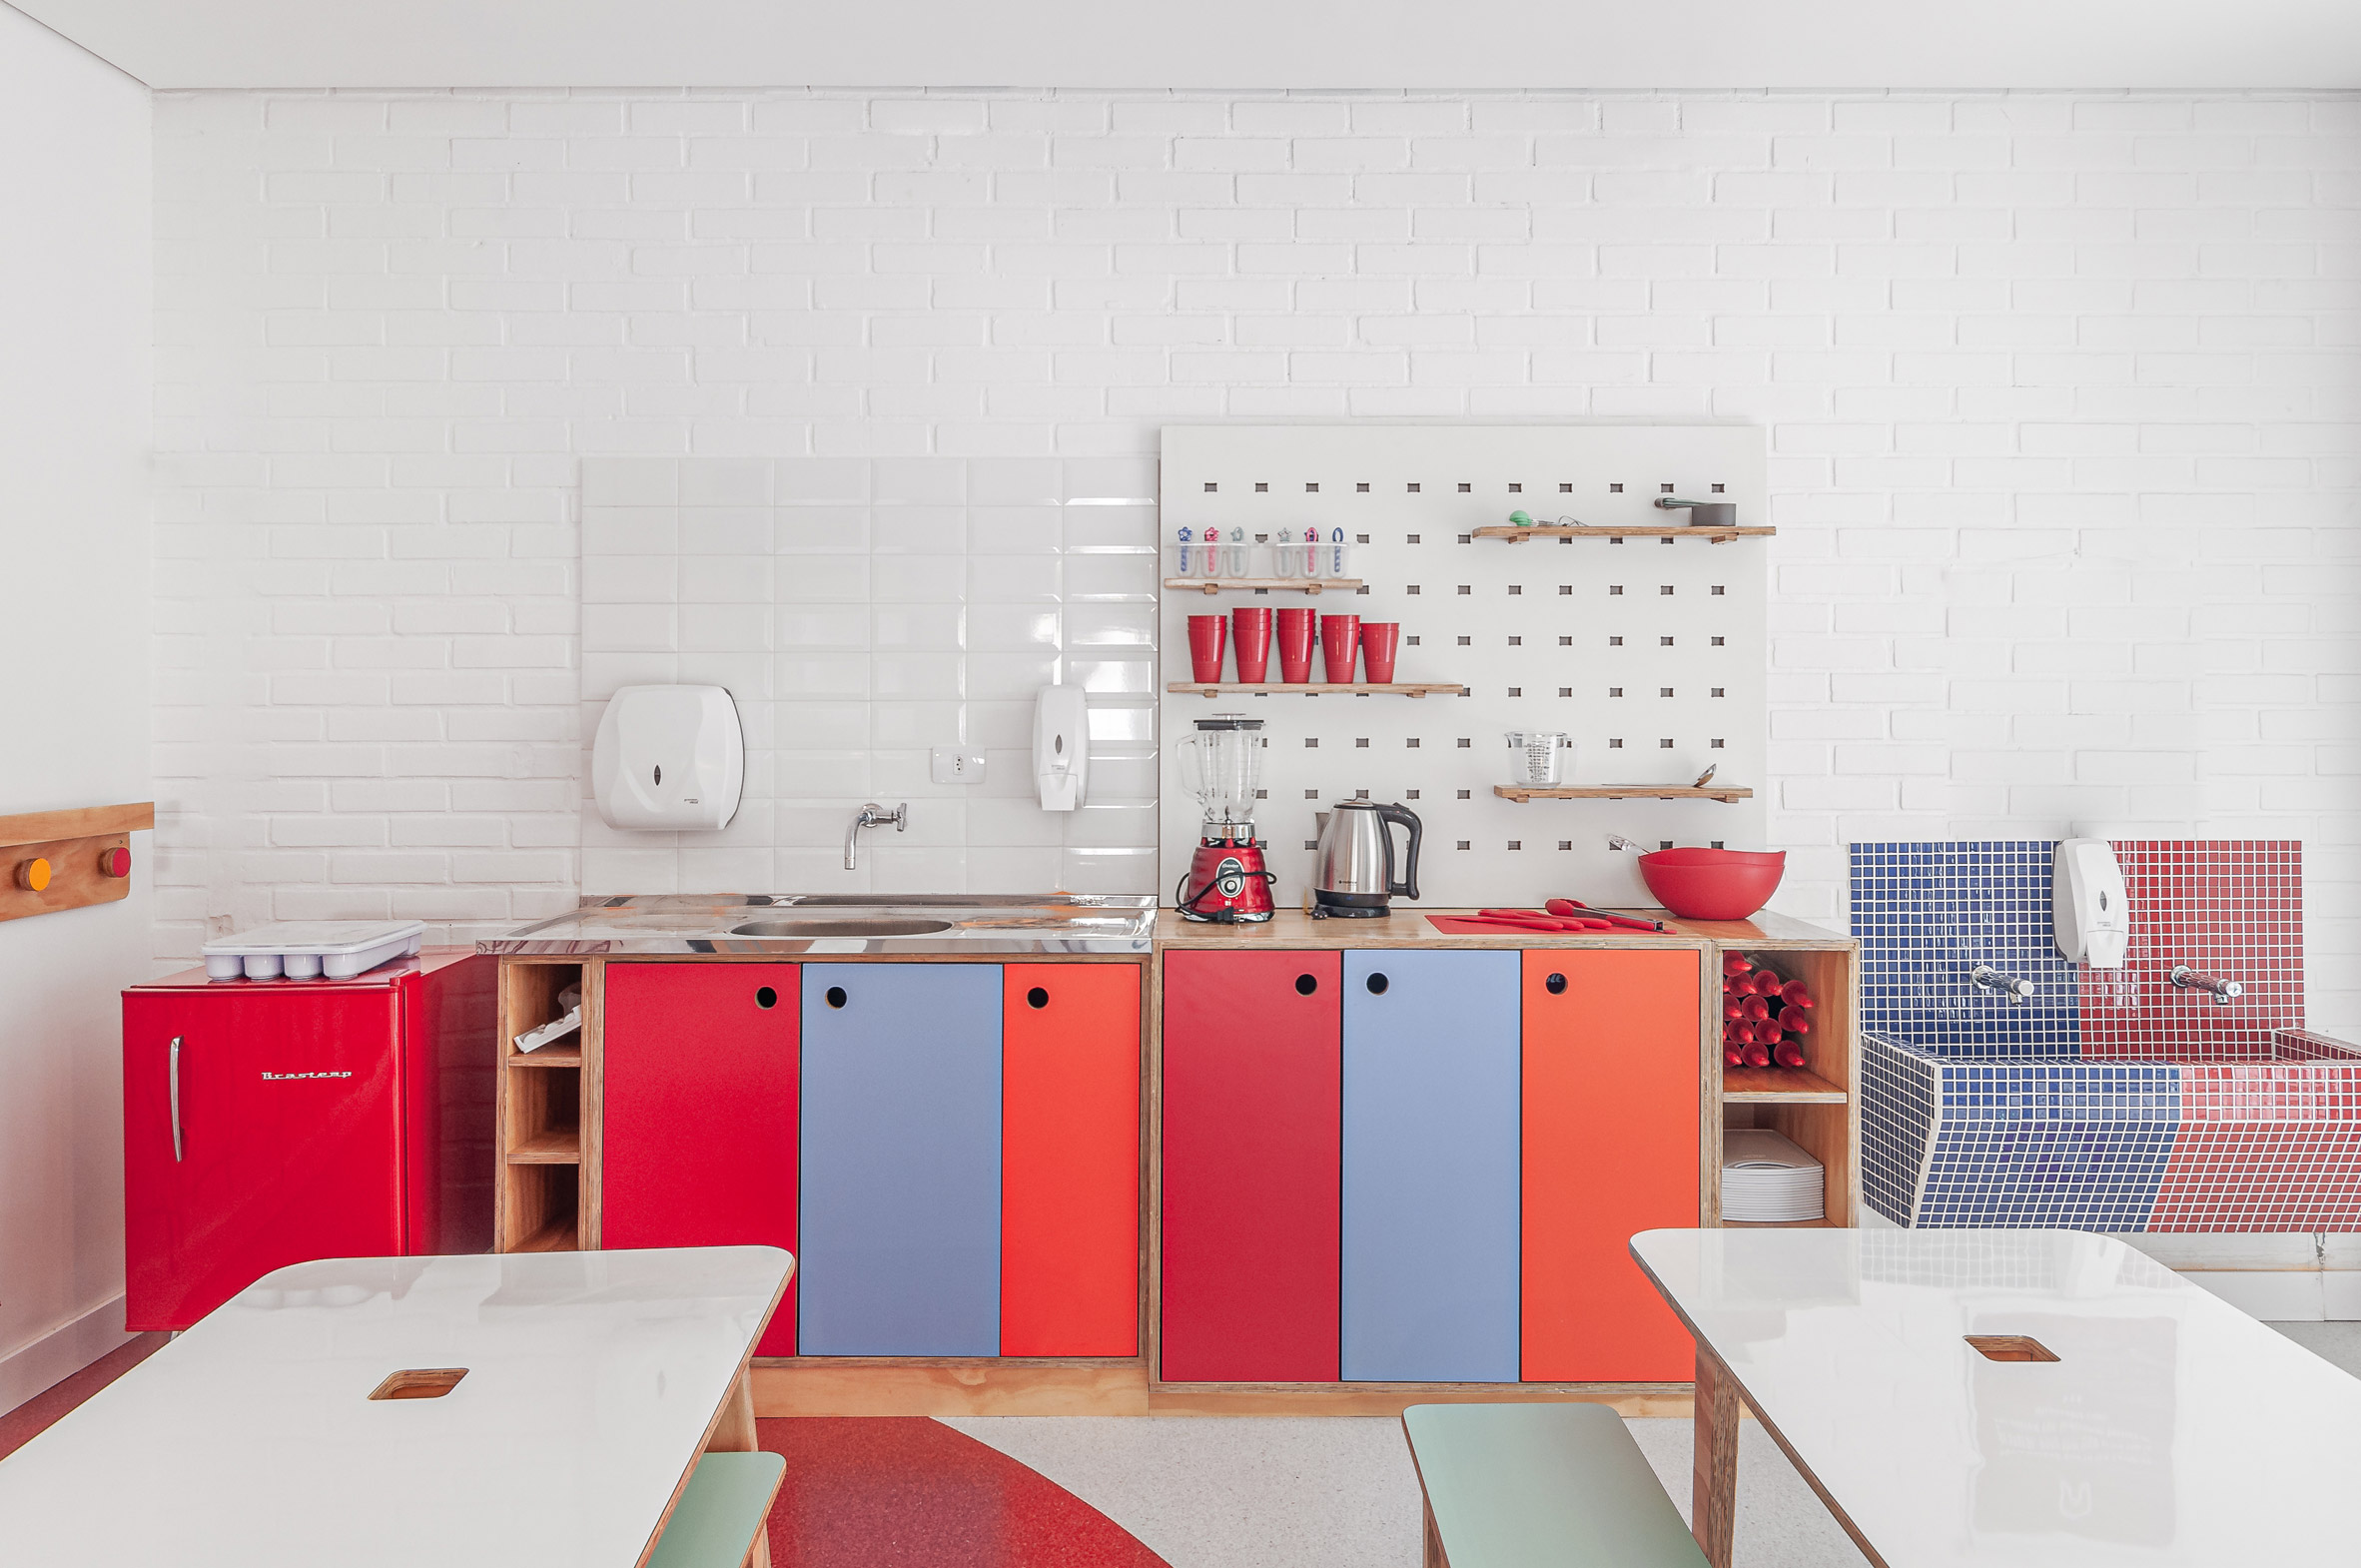 Bright cabinets line the classrooms